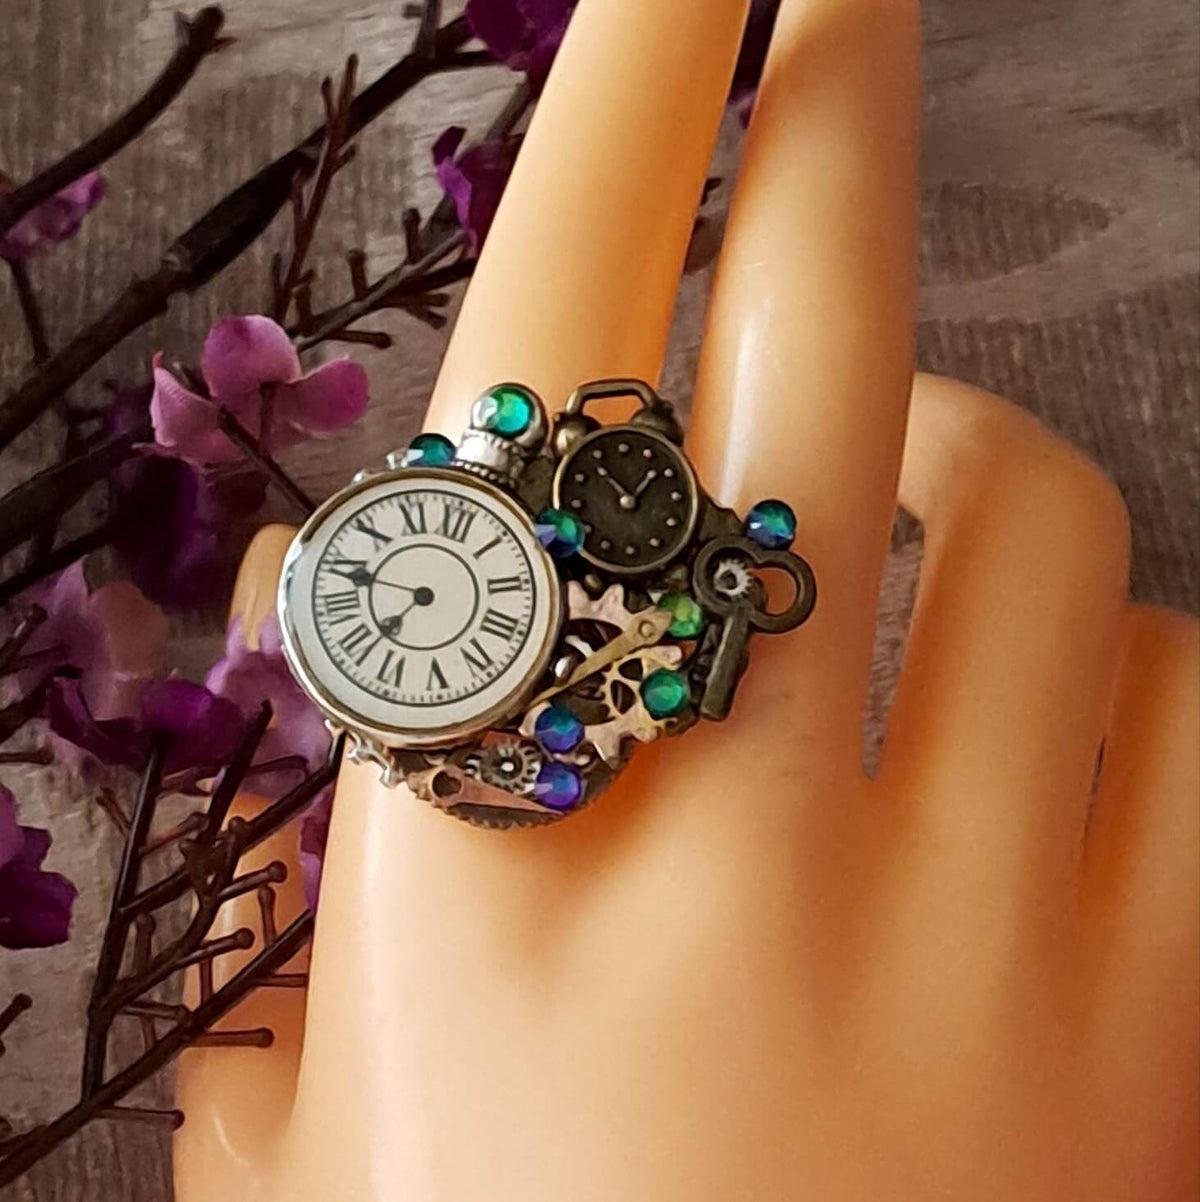 Clock and Gears Fantasy Ring